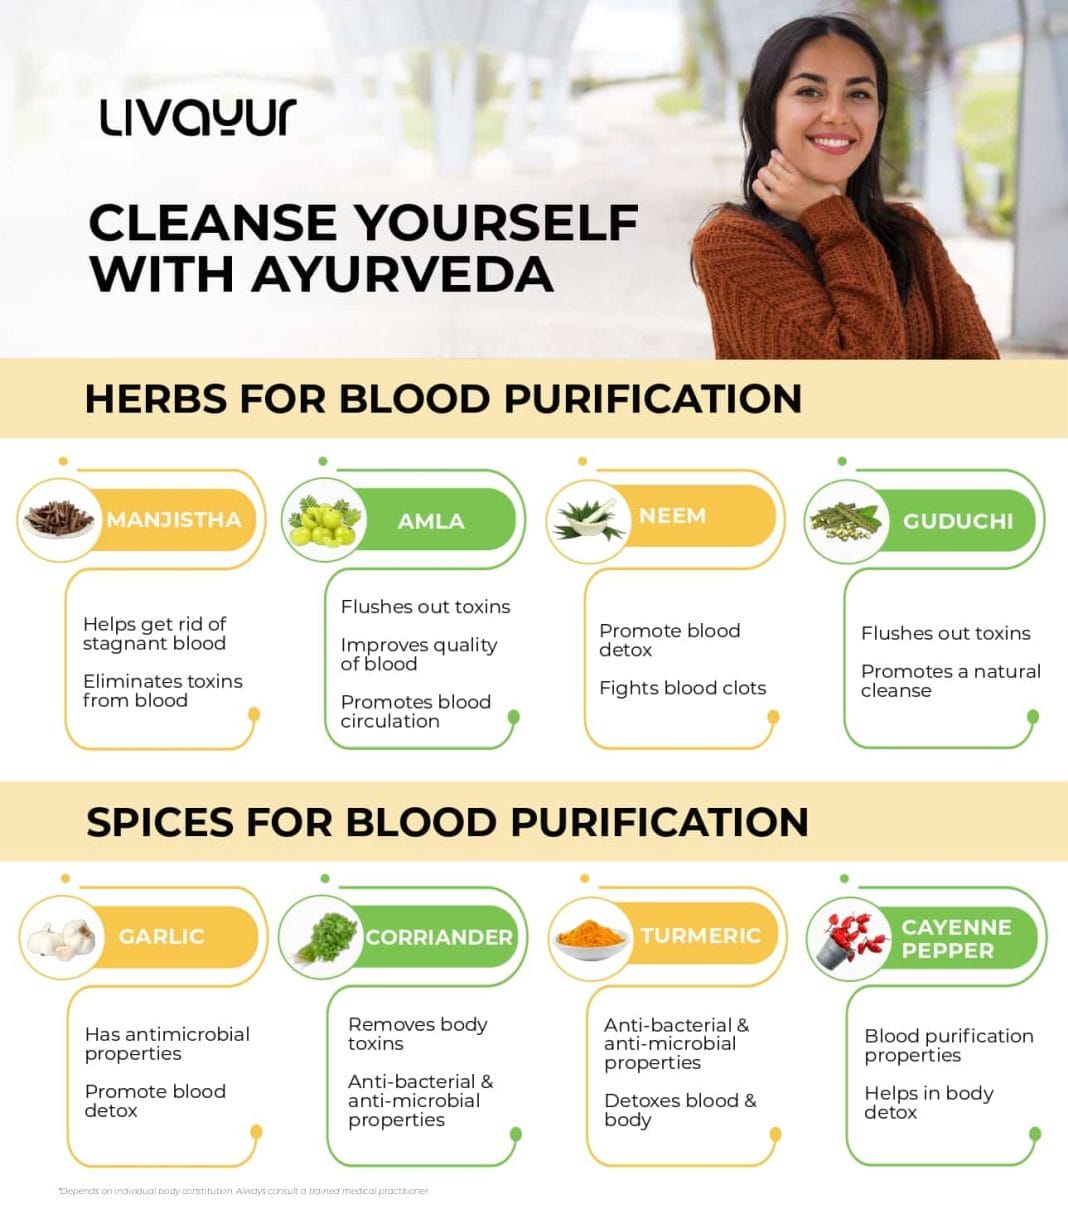 Cleanse Yourself With Ayurveda